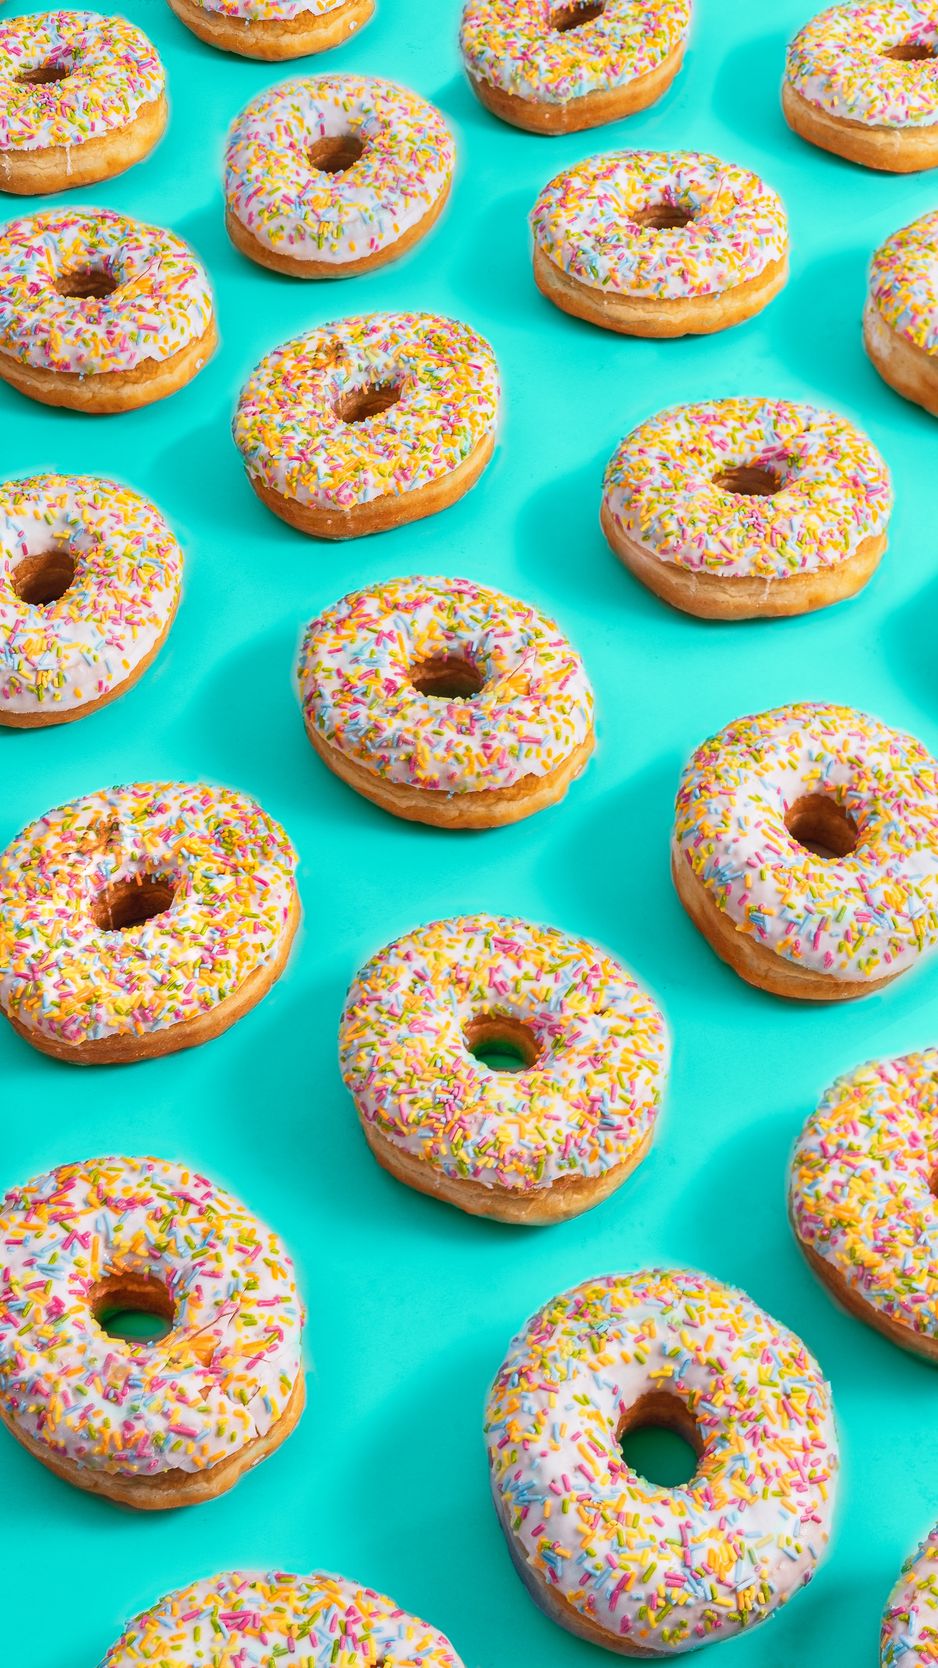 Download wallpaper 938x1668 donuts, sprinkles, dessert, sweets iphone  8/7/6s/6 for parallax hd background